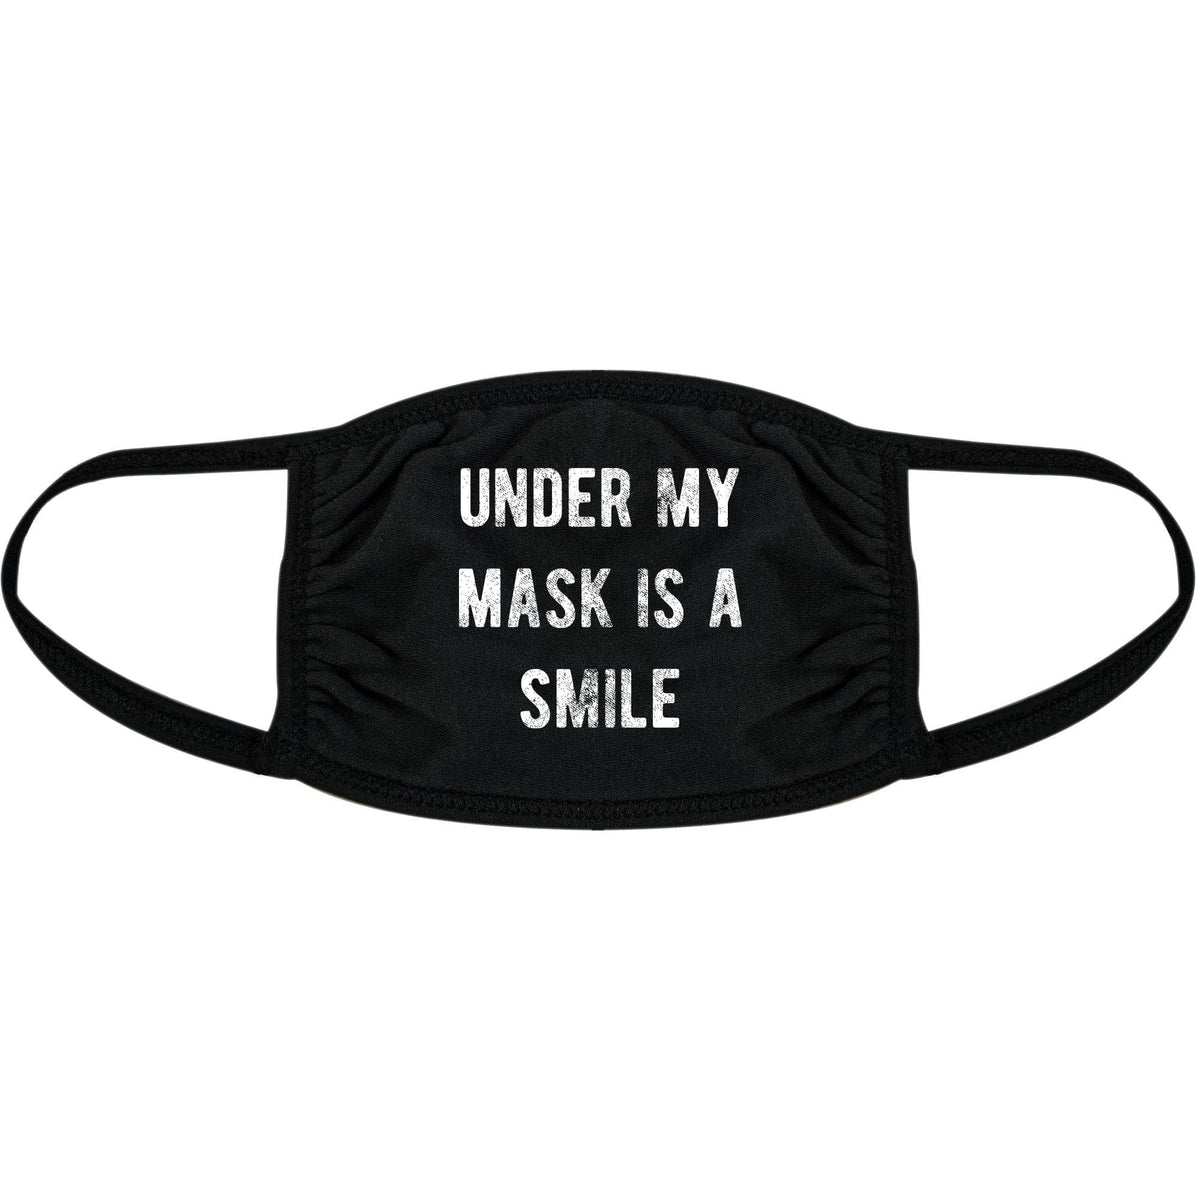 Under My Mask Is A Smile Face Mask Mask - Crazy Dog T-Shirts